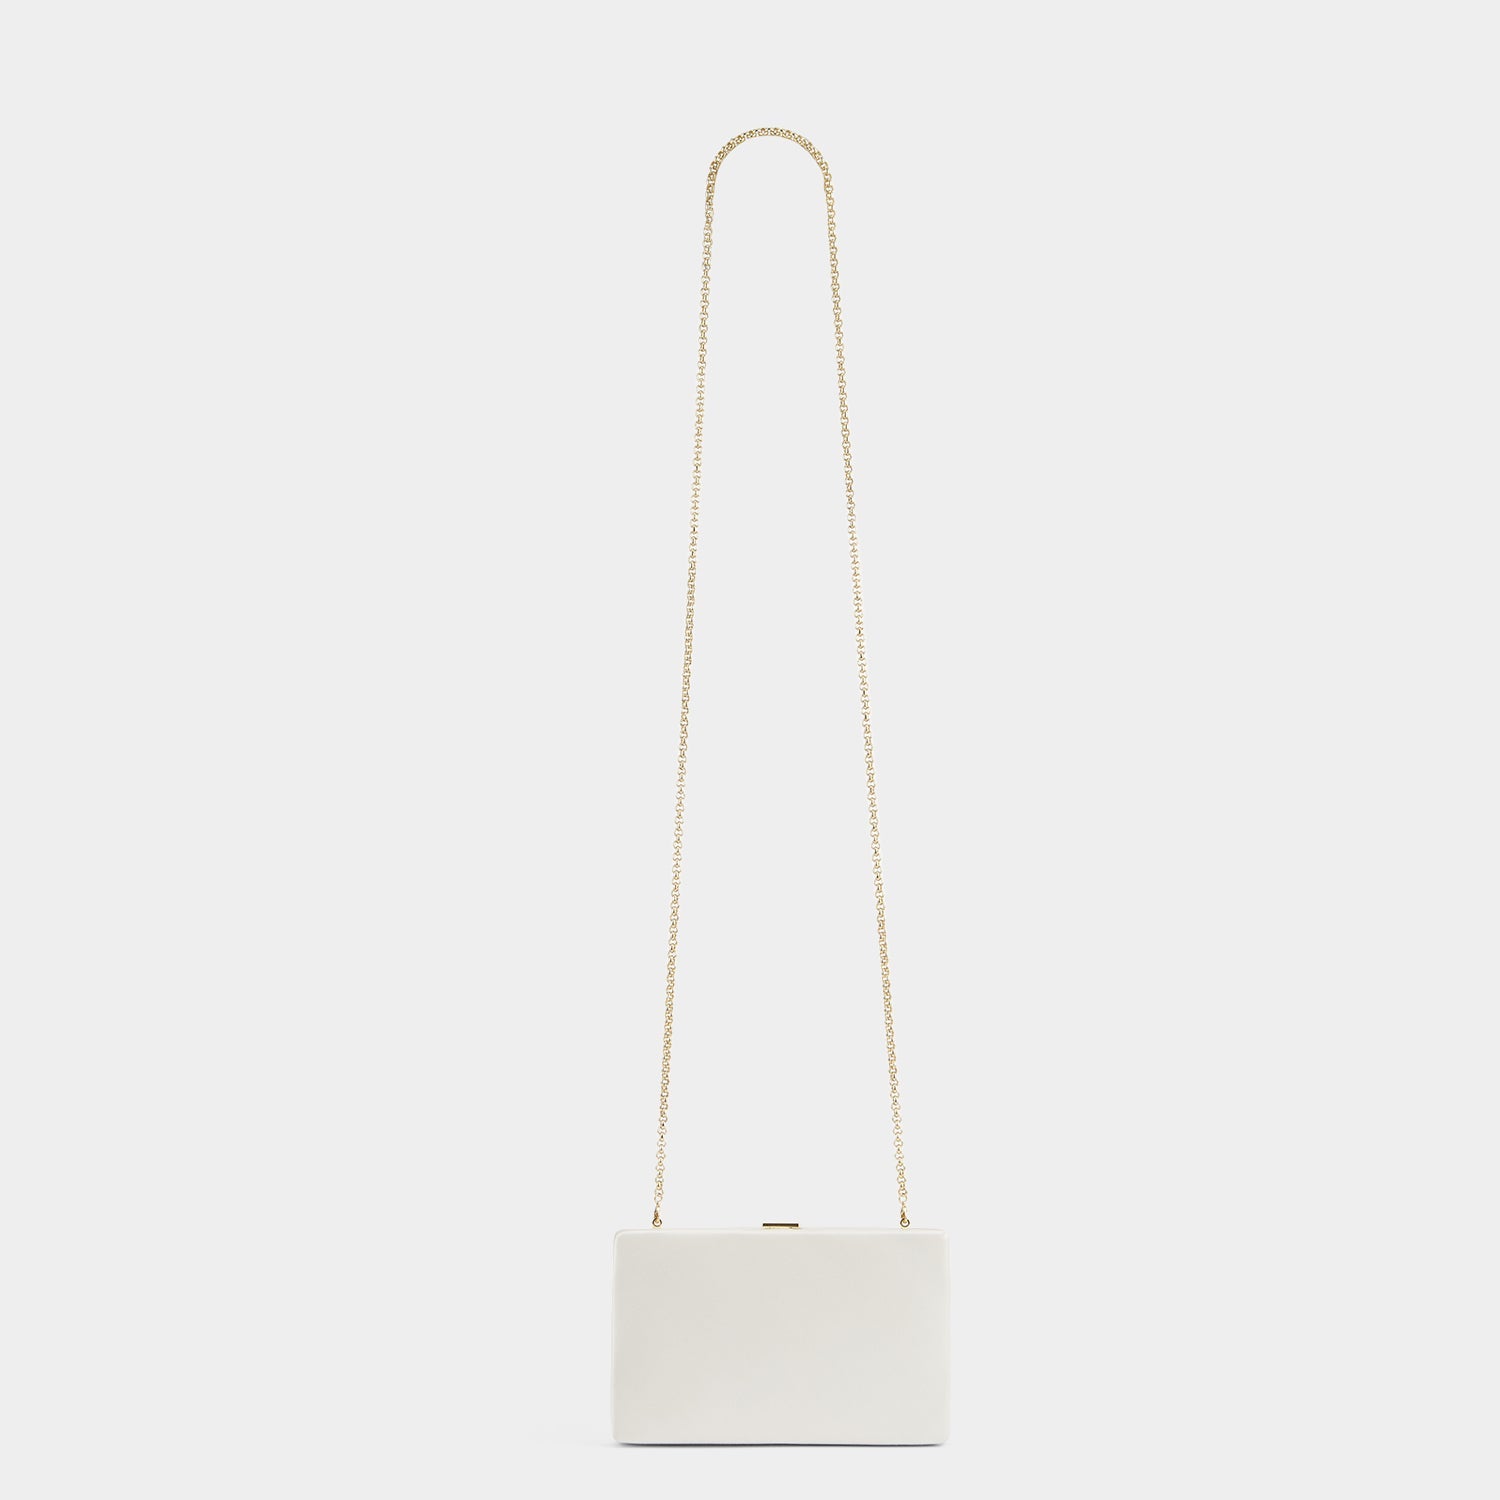 'I carry your heart' Clutch -

                  
                    Recycled Satin in Ivory -
                  

                  Anya Hindmarch EU
